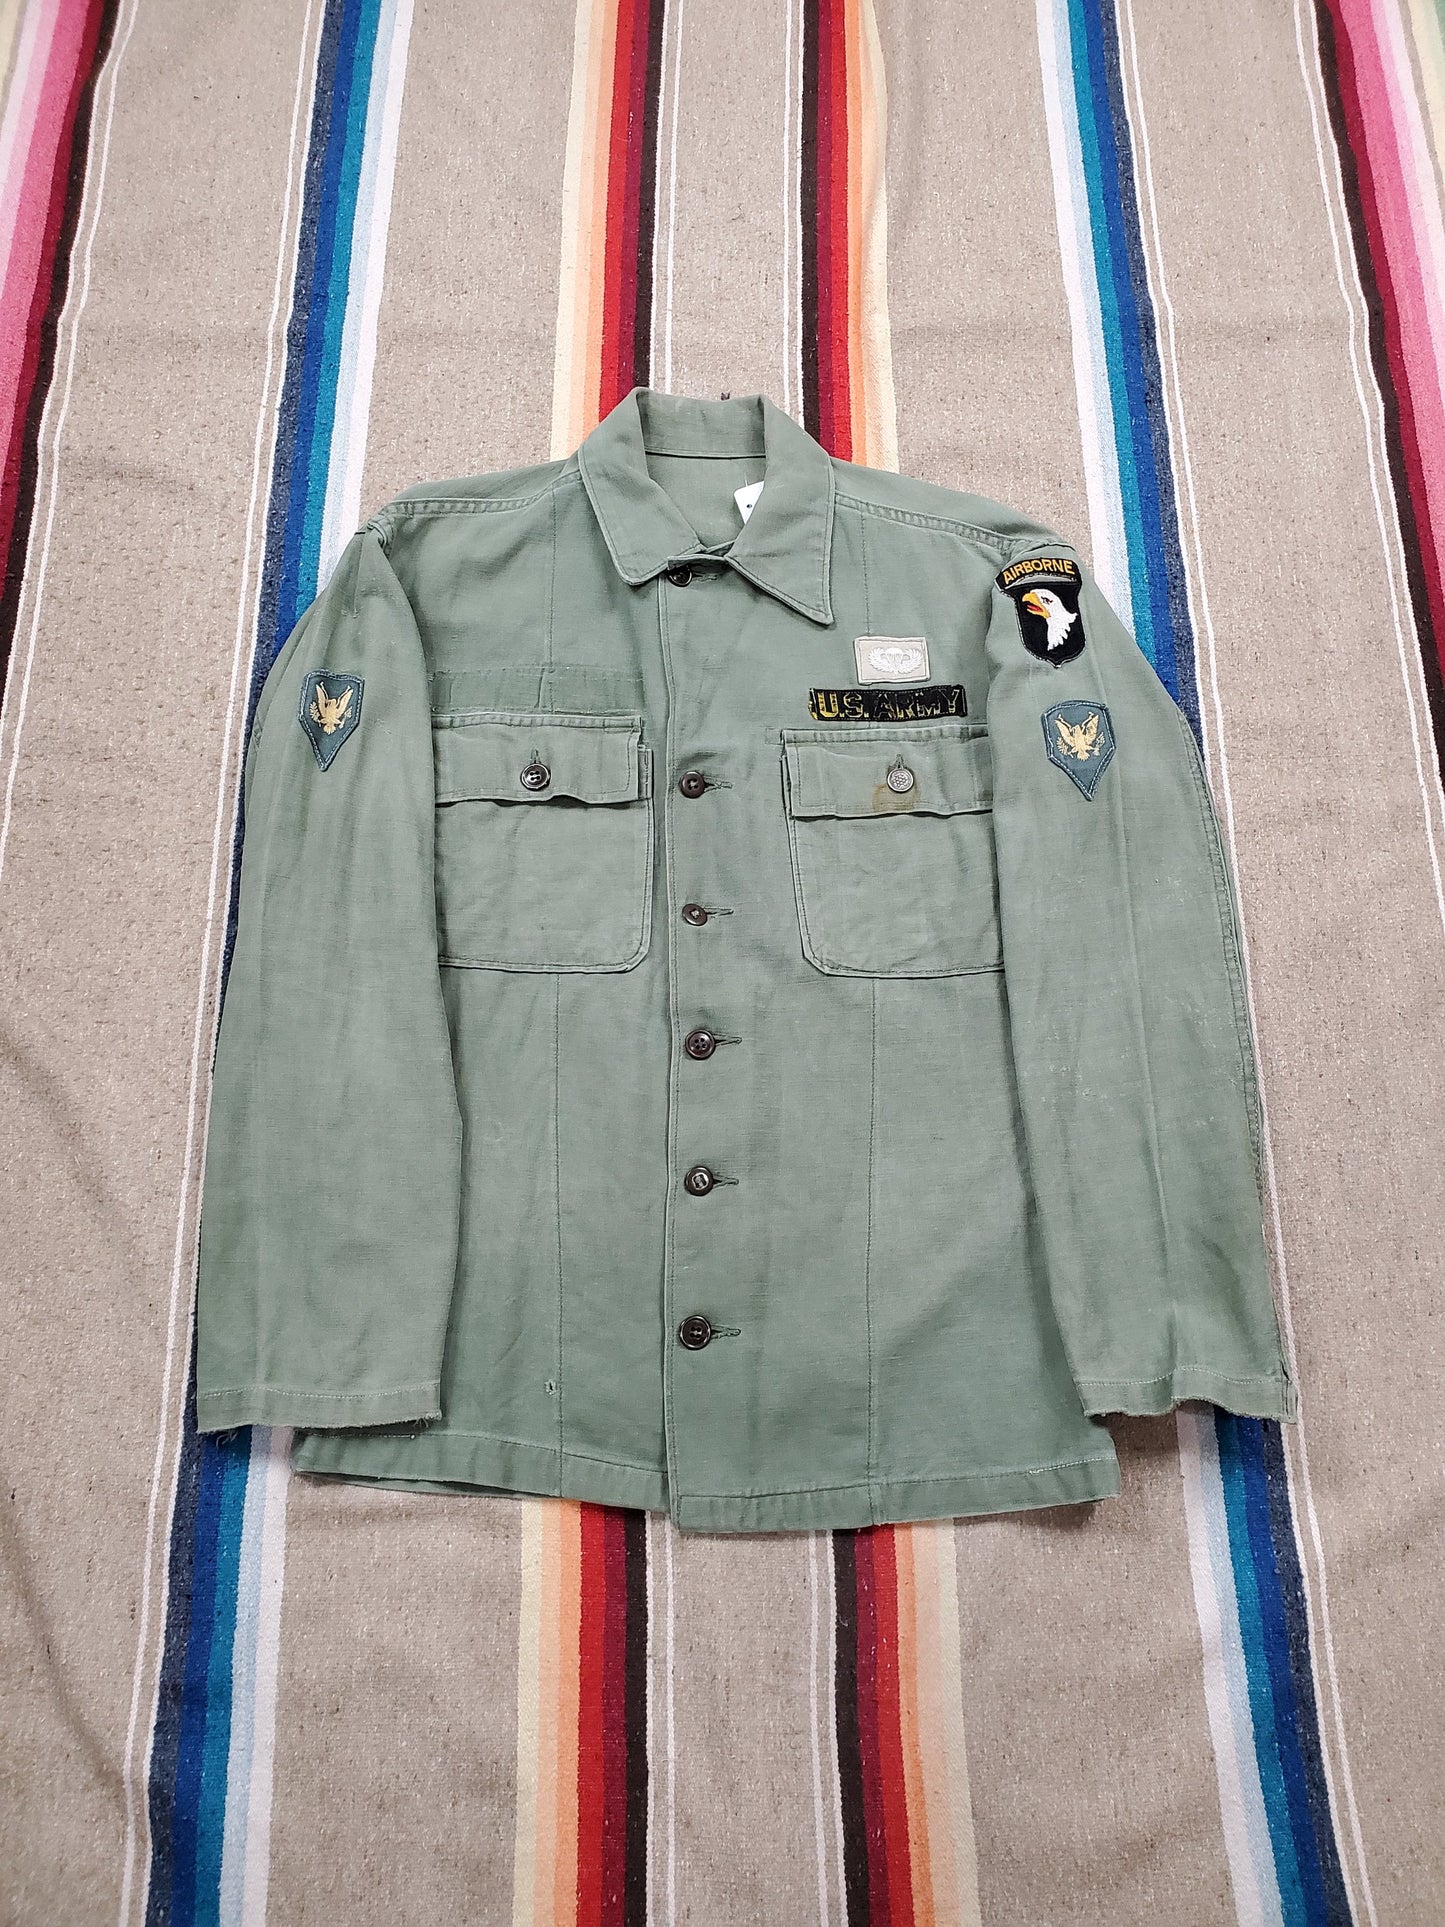 1950s/1960s Type 1 OG107 Sateen Shirt 13 Star Button Airborne Patch Made in USA Size S